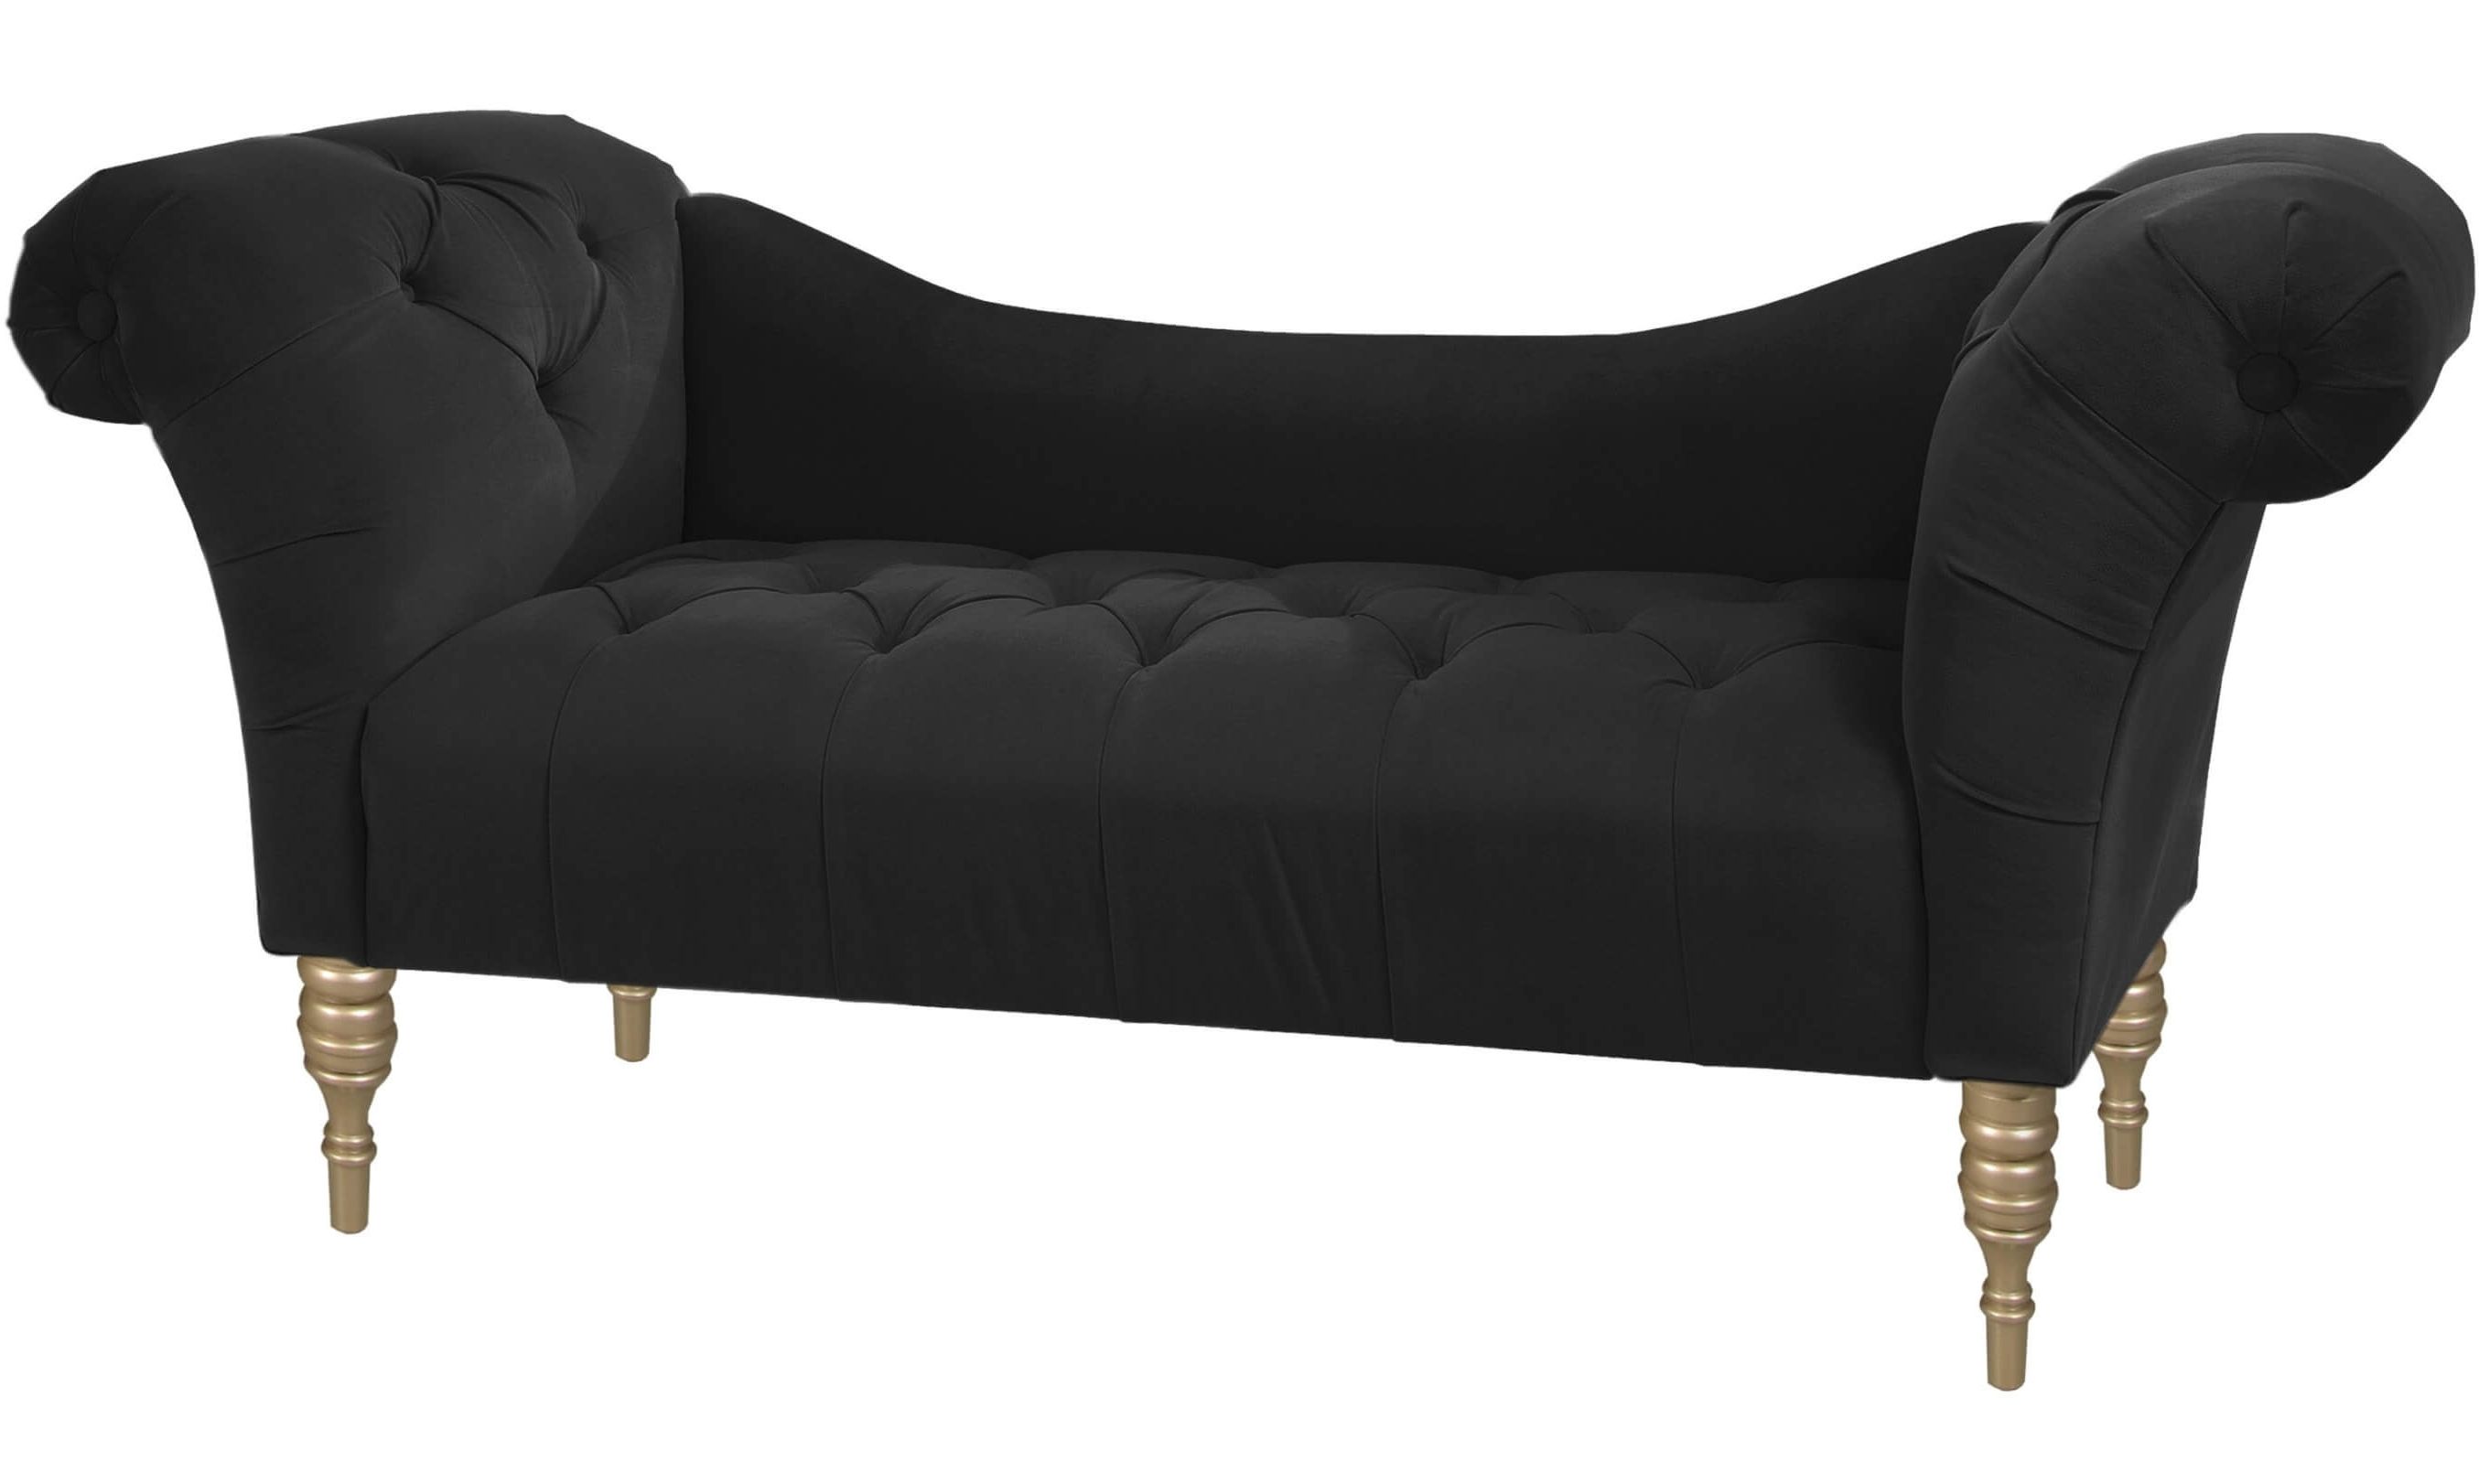 Top 20 Types Of Black Chaise Lounges (buying Guide) – For Fashionable Tufted Chaises (View 5 of 15)